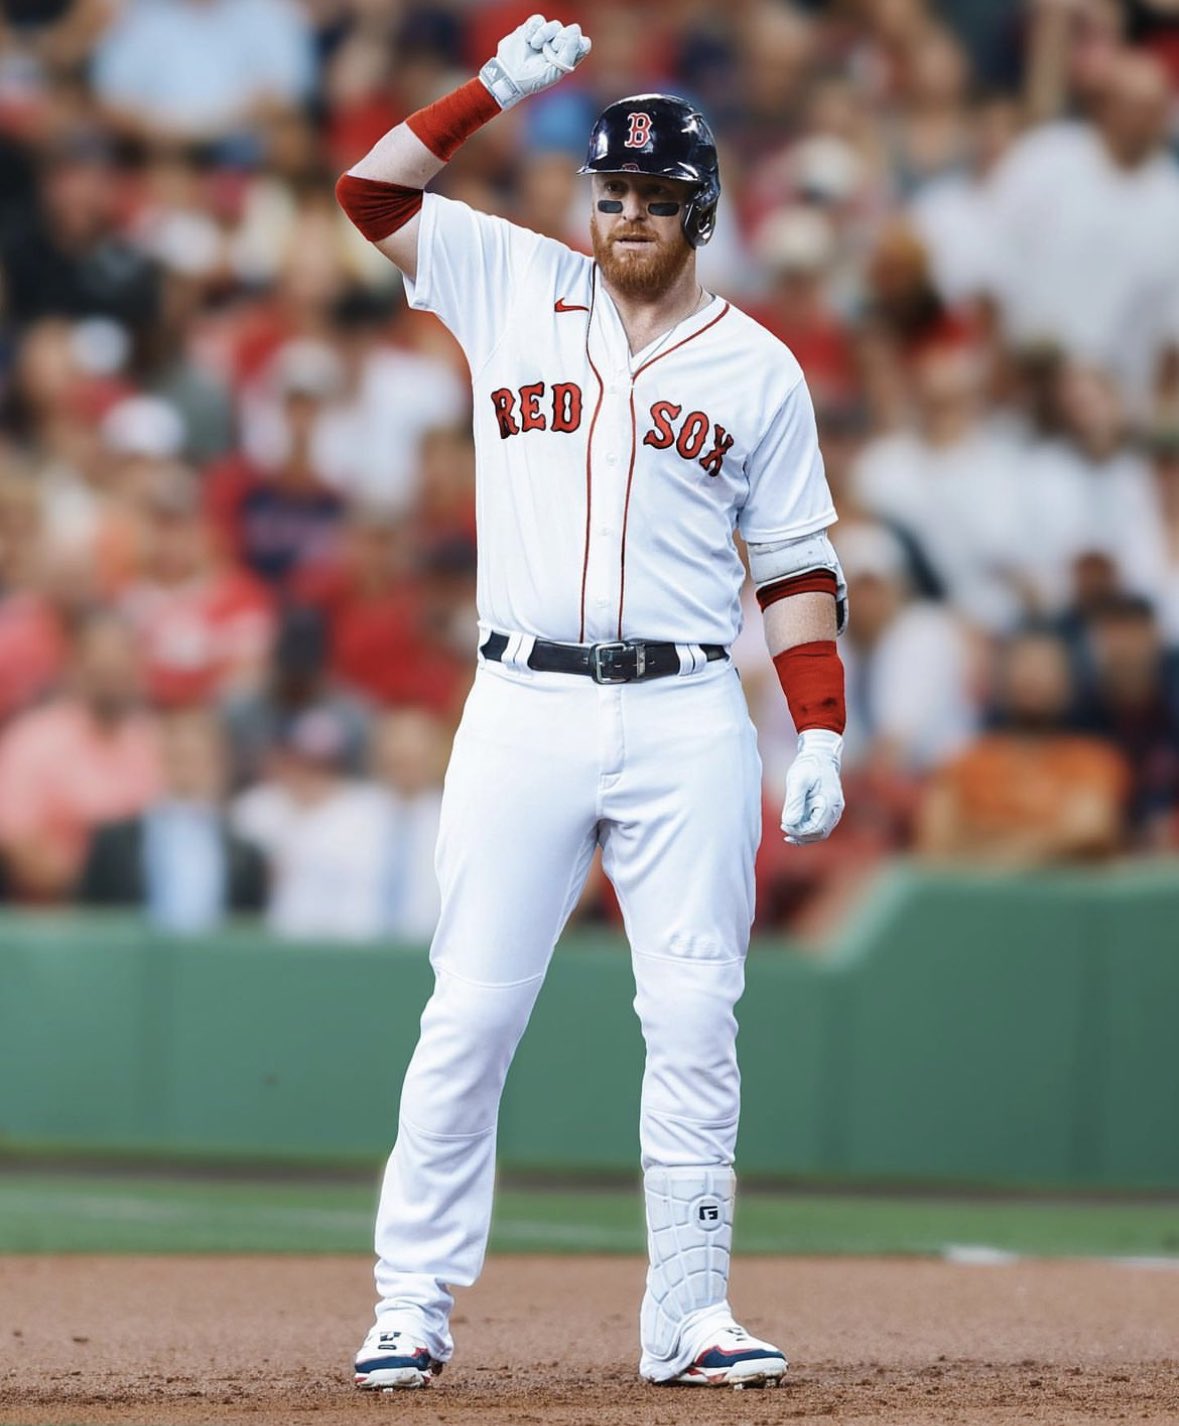 La Nación Red Sox on Twitter  Justin turner, Boston red, Red sox